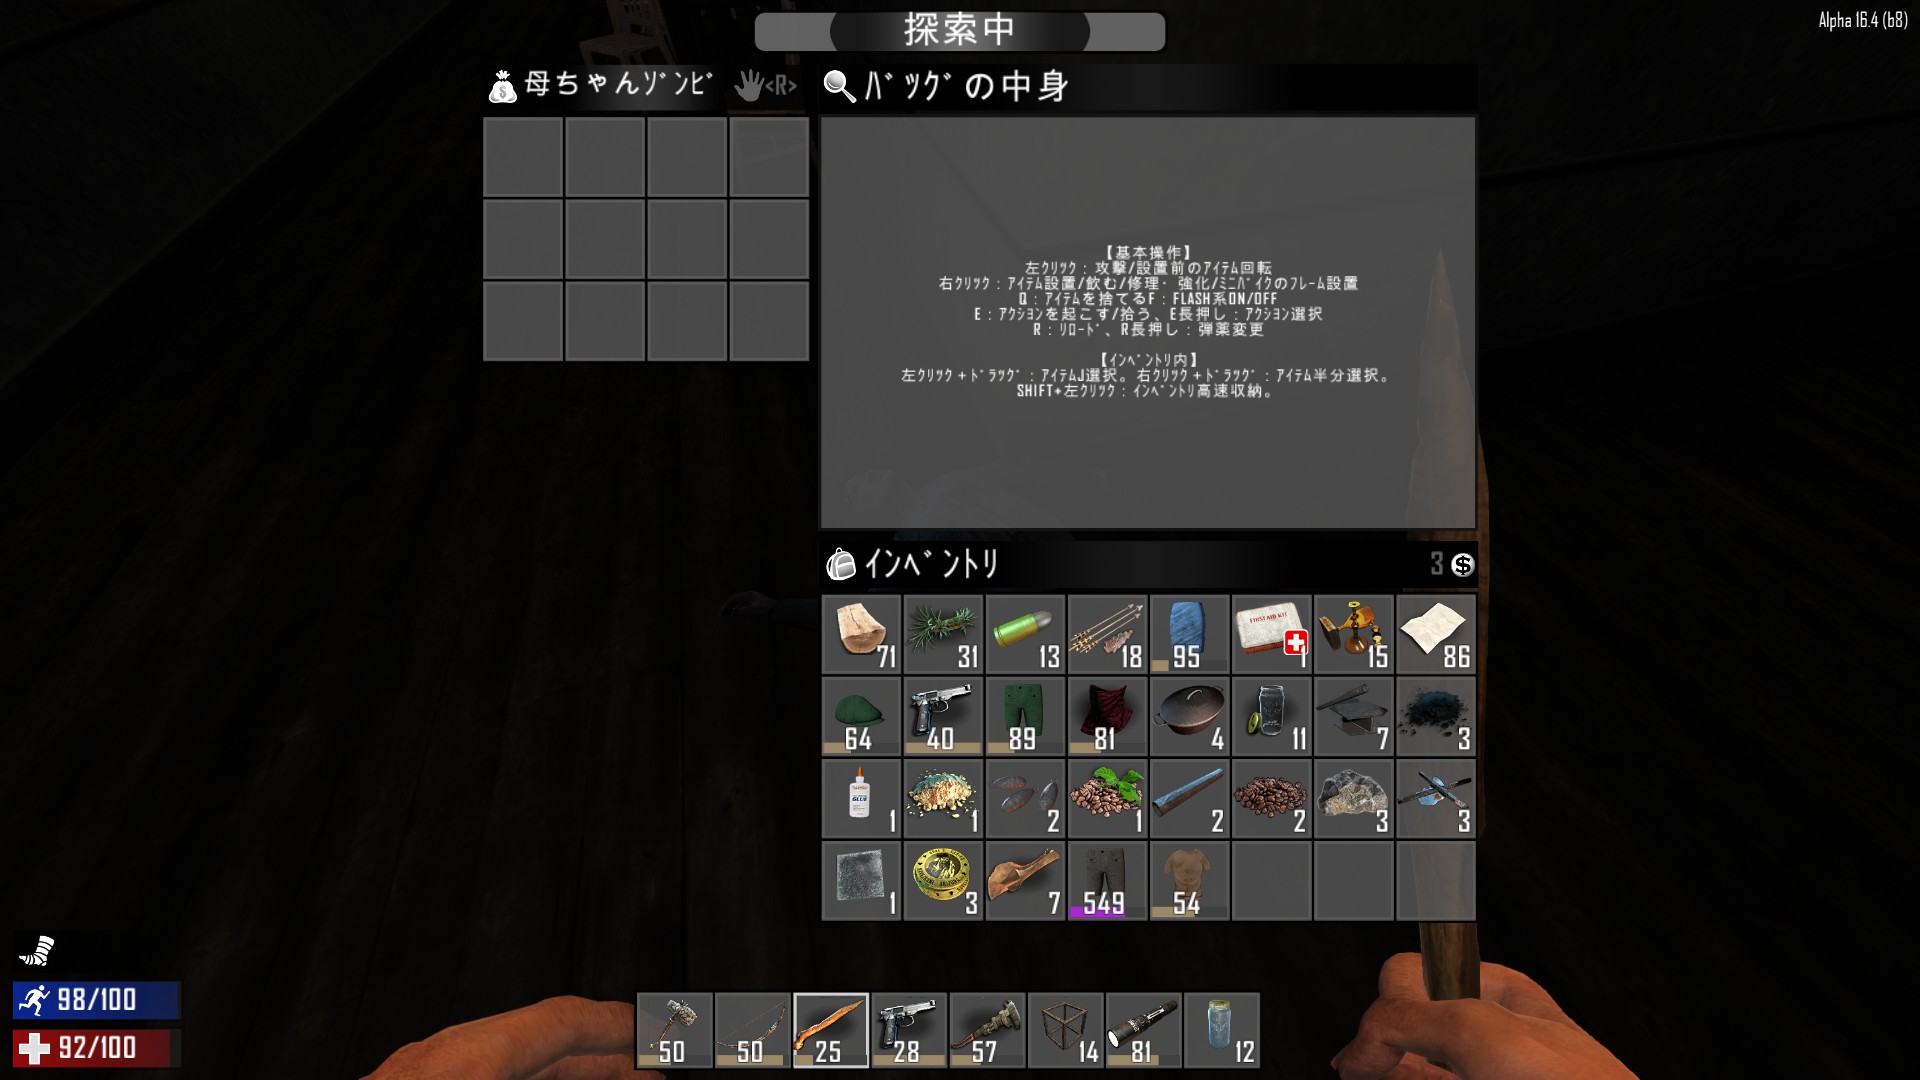 7 days to die console commands complete quest